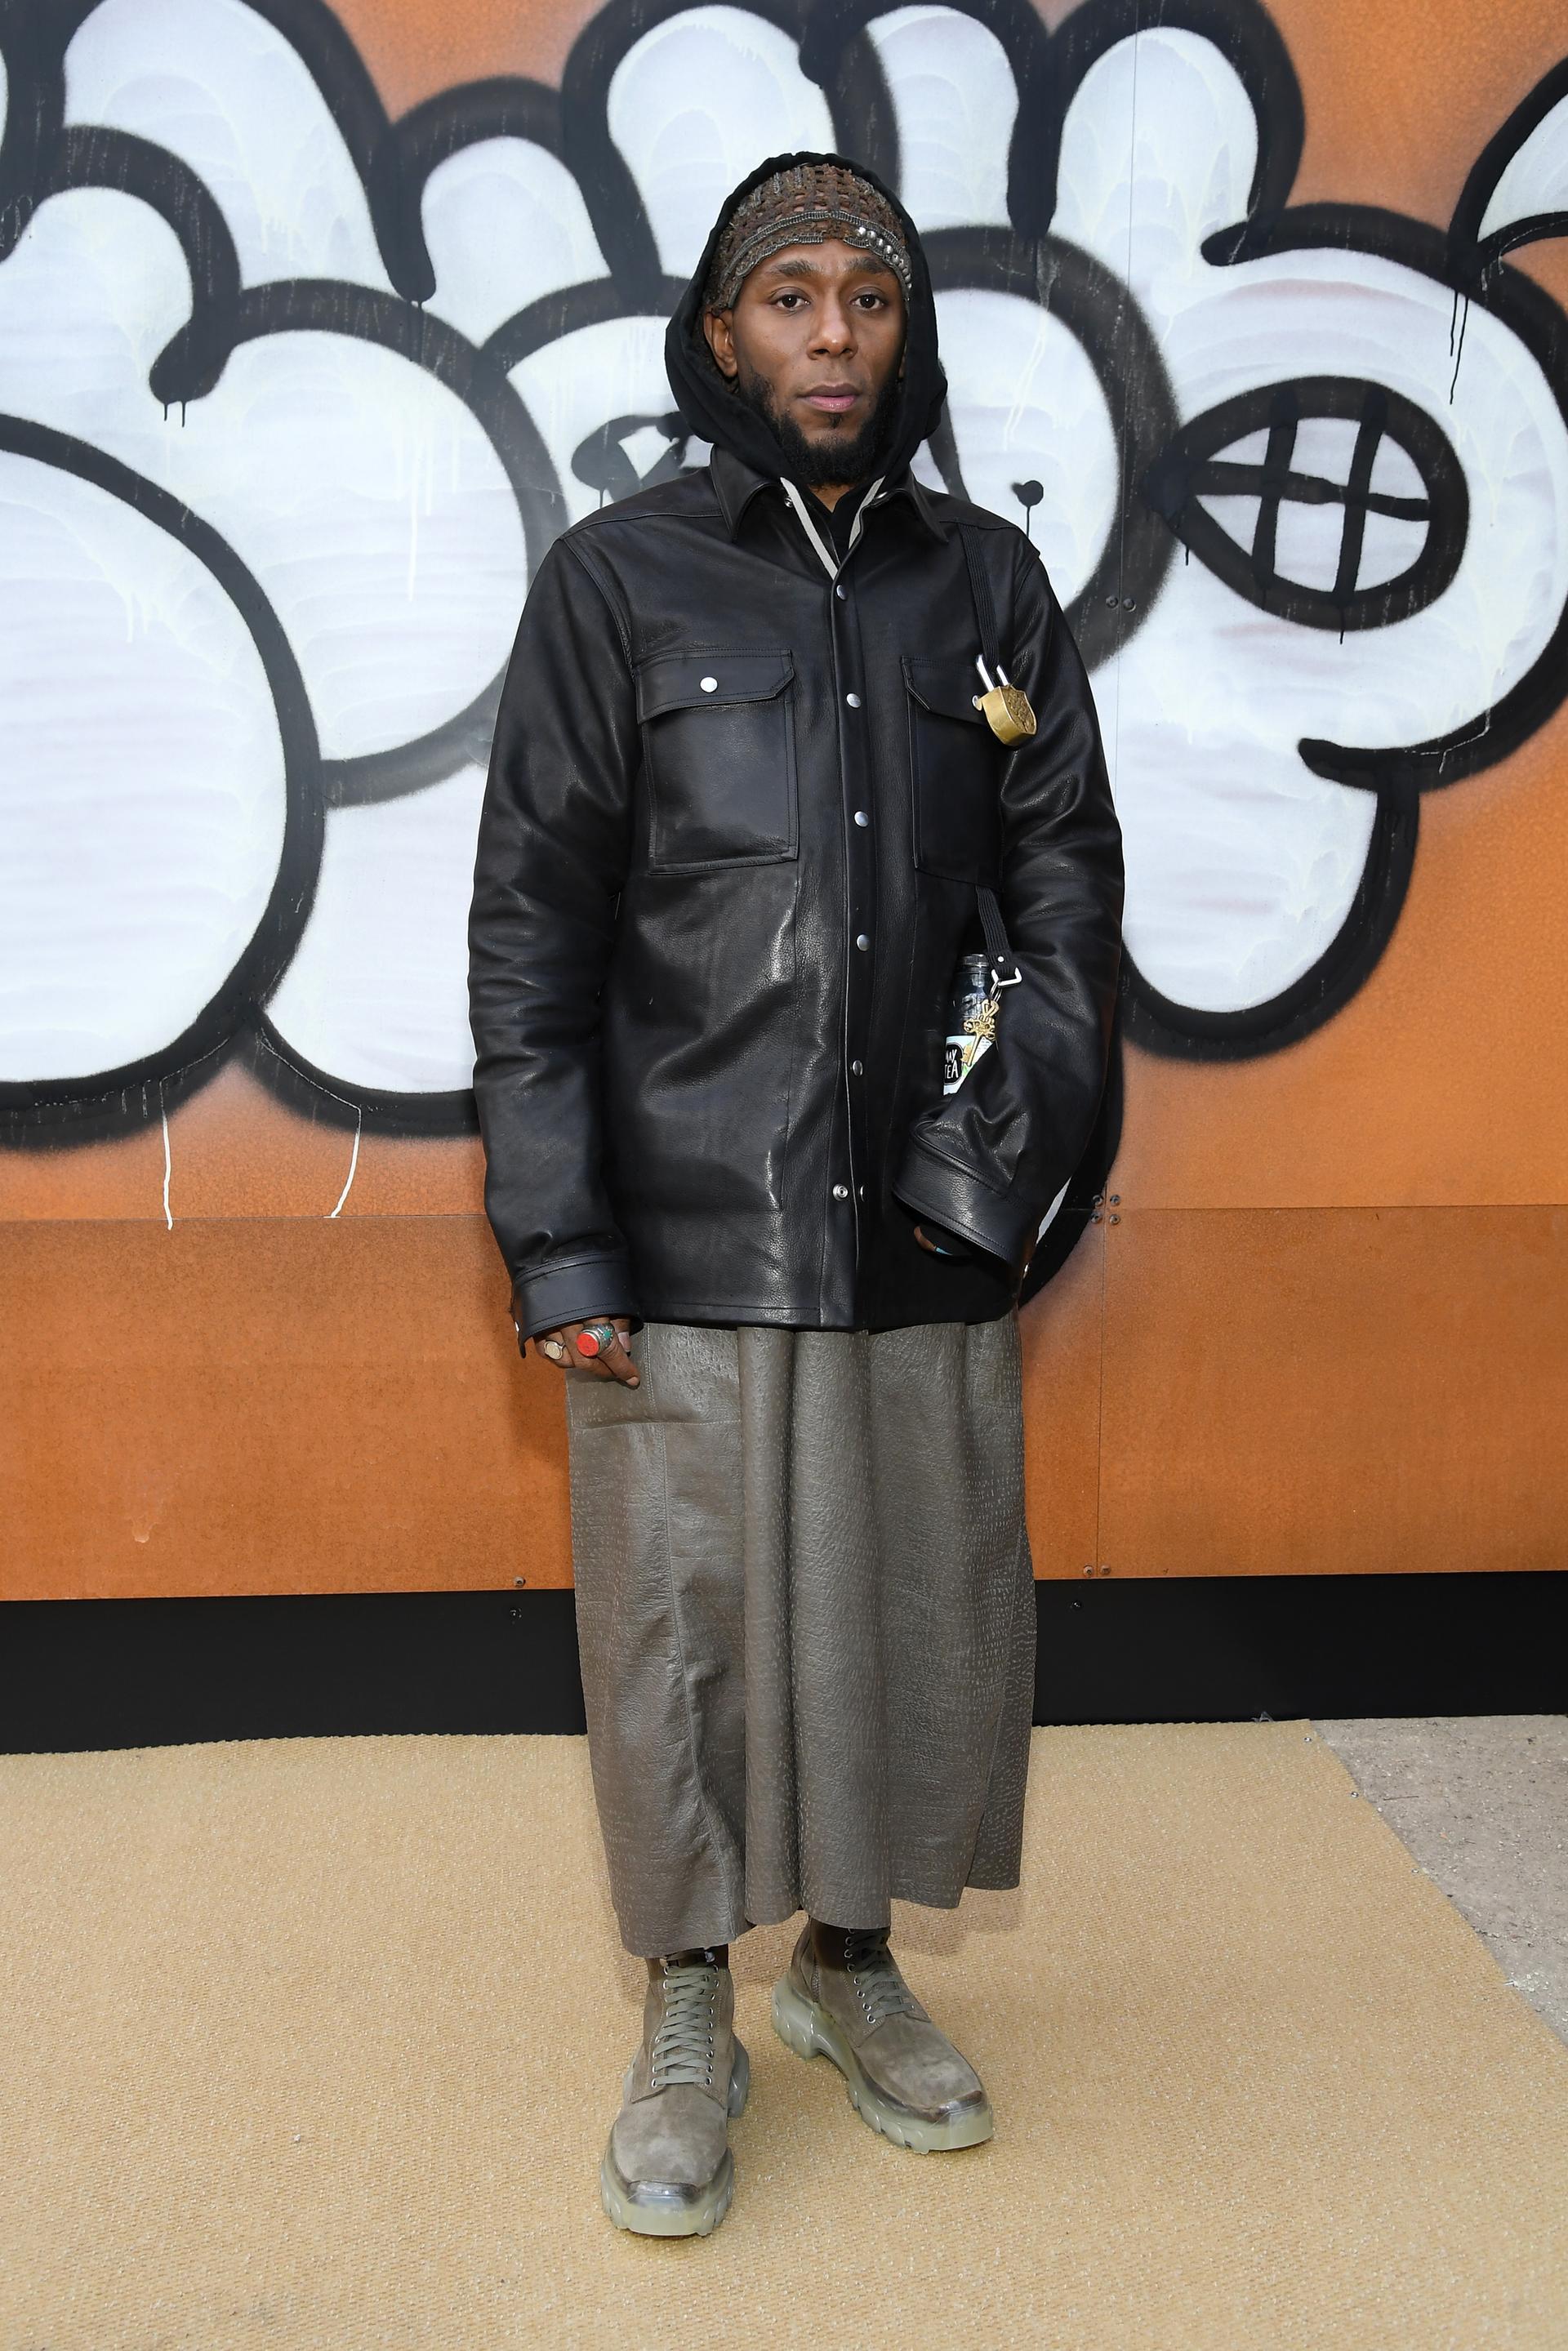 Ghana Rising: Fashion & Culture: Yasiin Bey, the artist formerly known as  Mos Def wears Kente wrap and causes uproar.